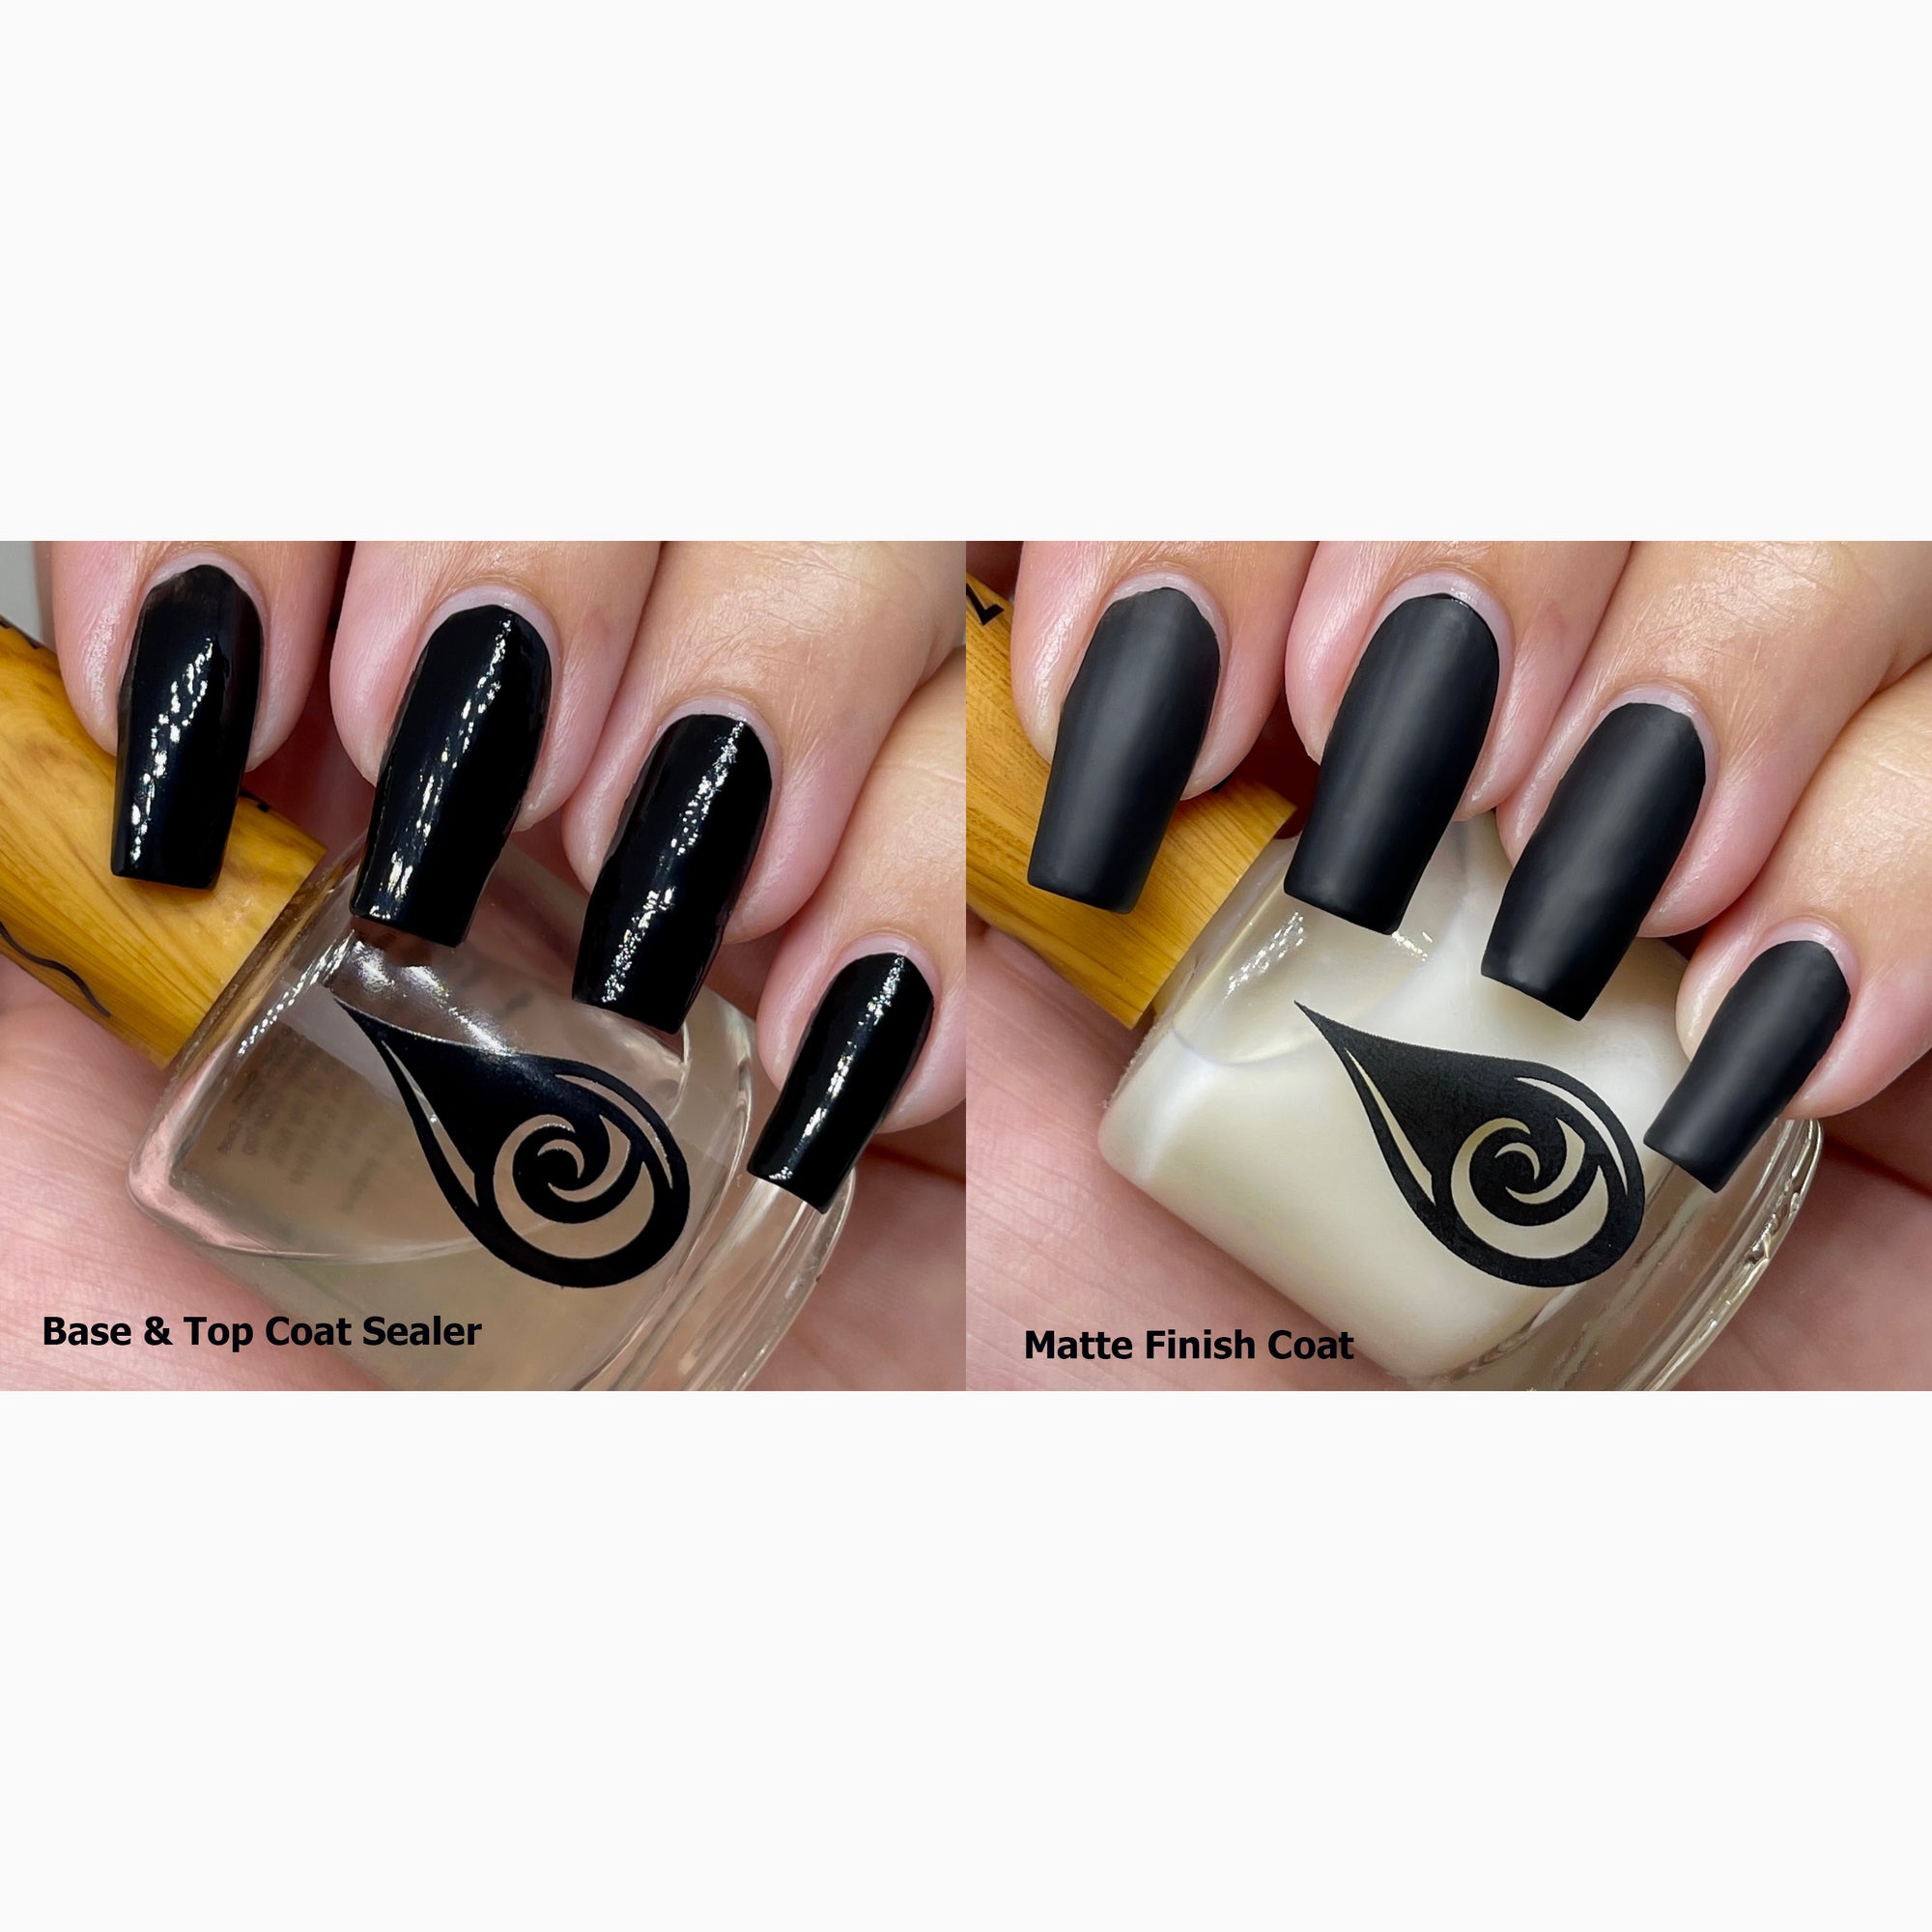 Buy Miss Nails 15 Toxic Free Nail Color Matte Finish Matte Collection (8  ml) (Black Again) Online at Low Prices in India - Amazon.in